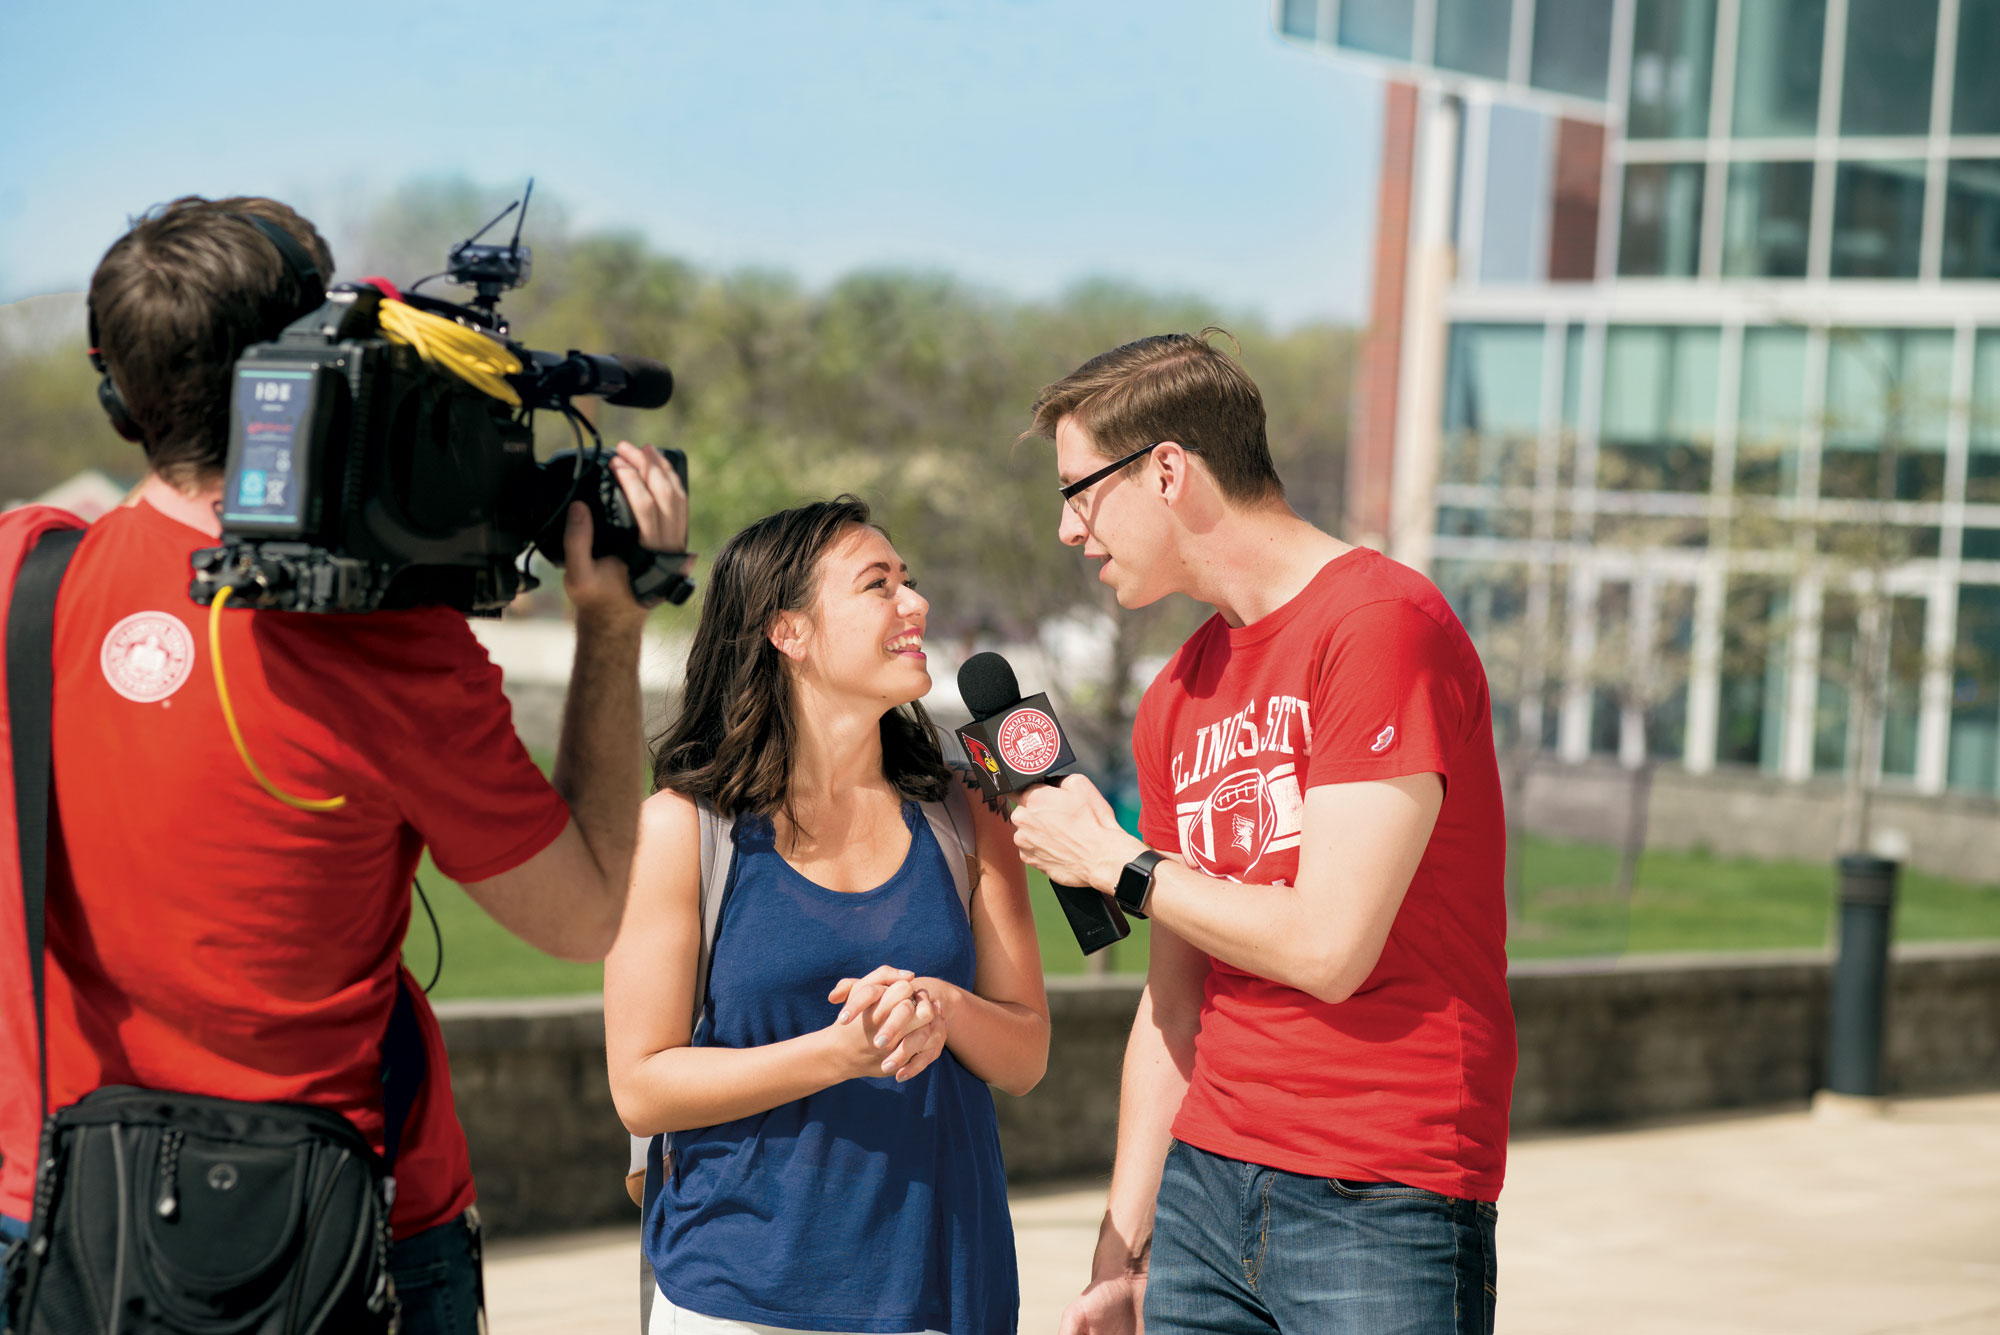 Keith Habersberger talks to a student on camera